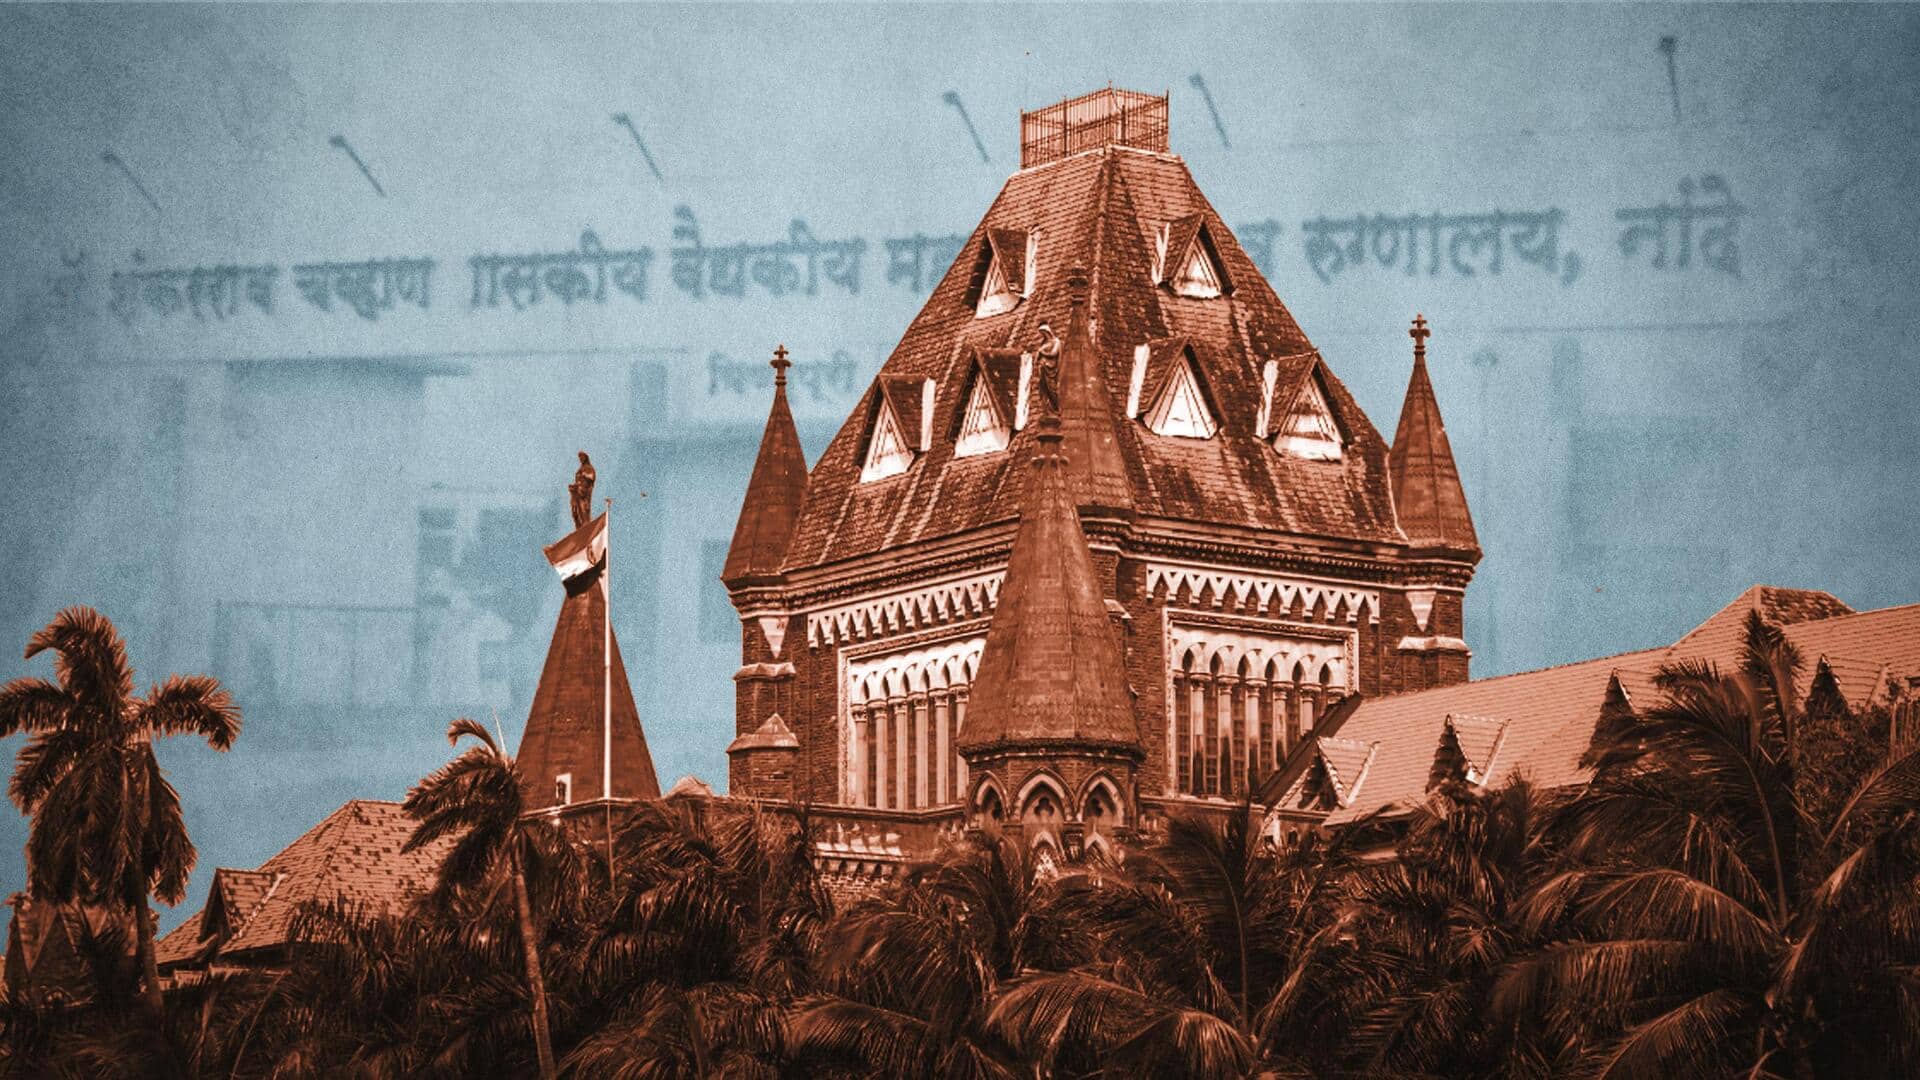 Maharashtra government can't run from responsibility: HC on Nanded tragedy